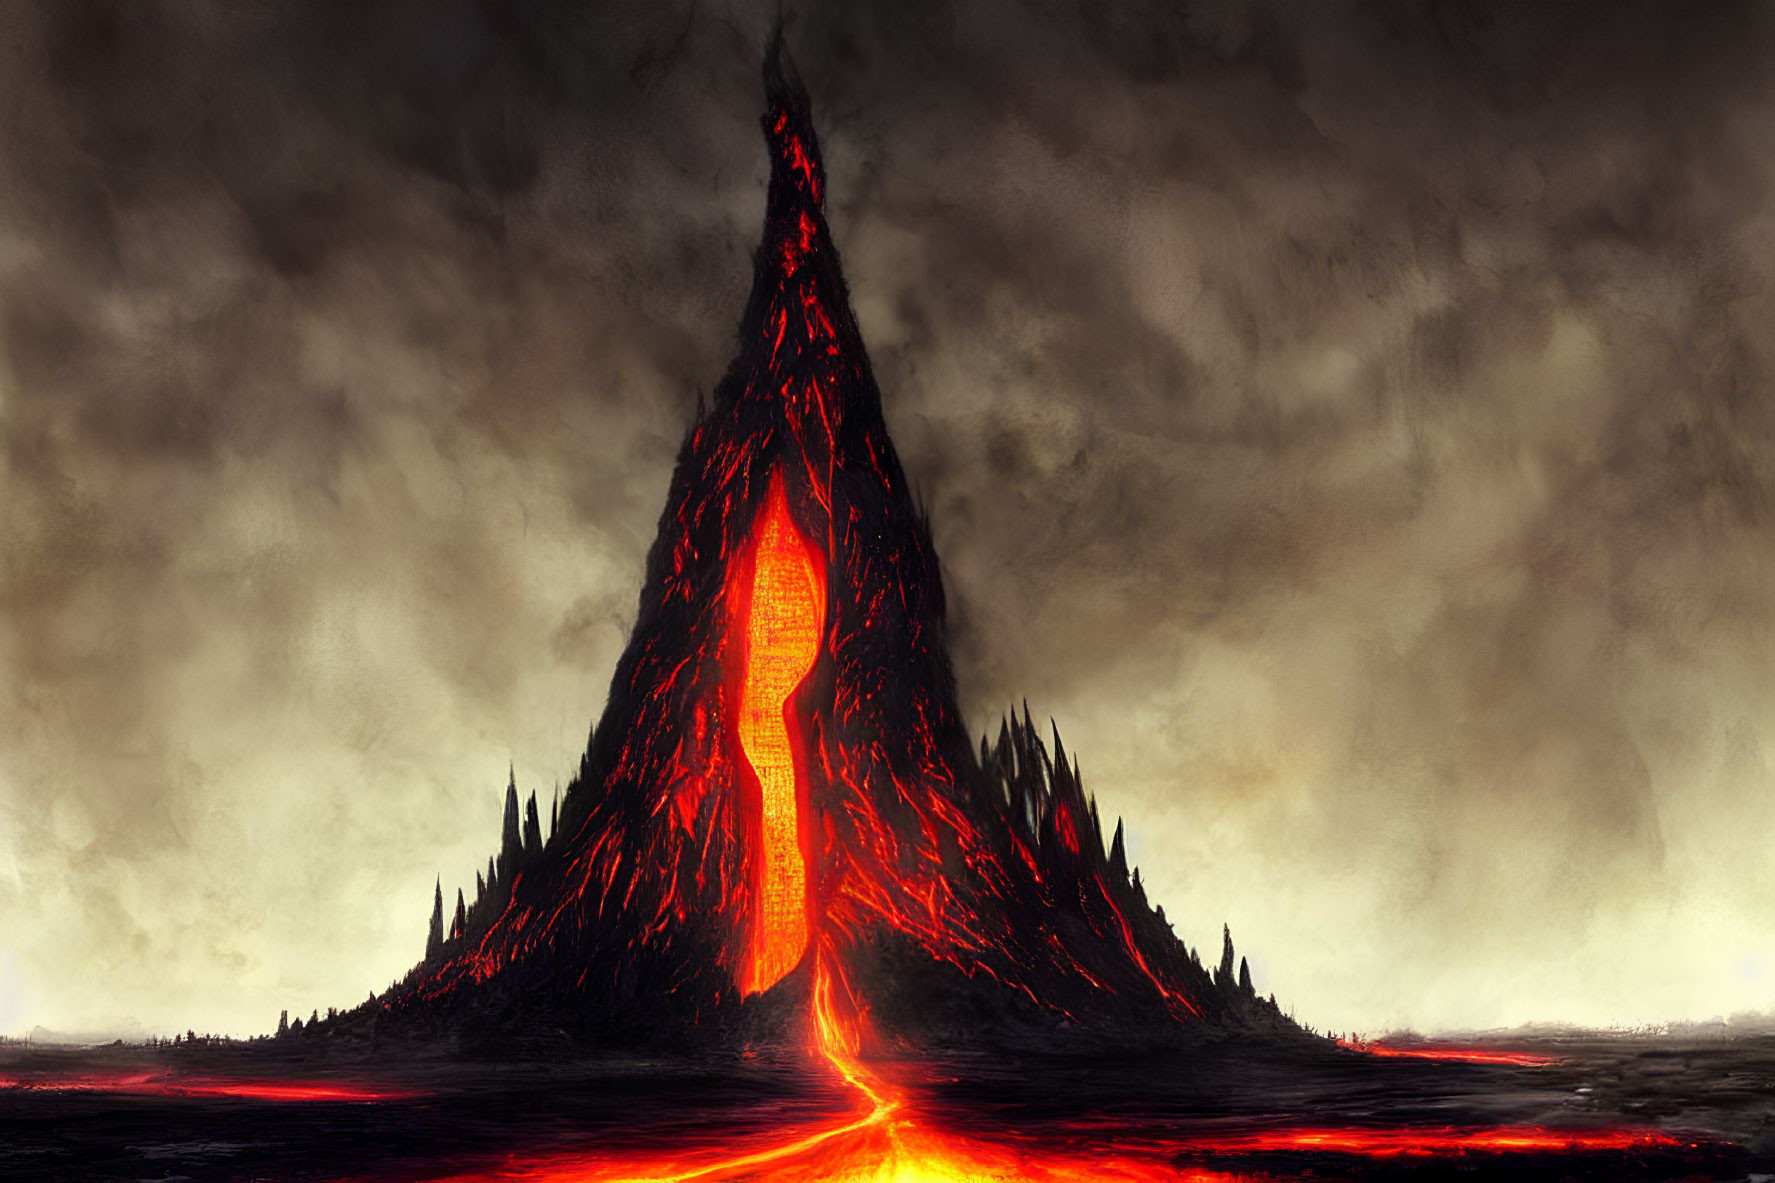 Majestic volcano with fiery crater and lava flows in desolate landscape